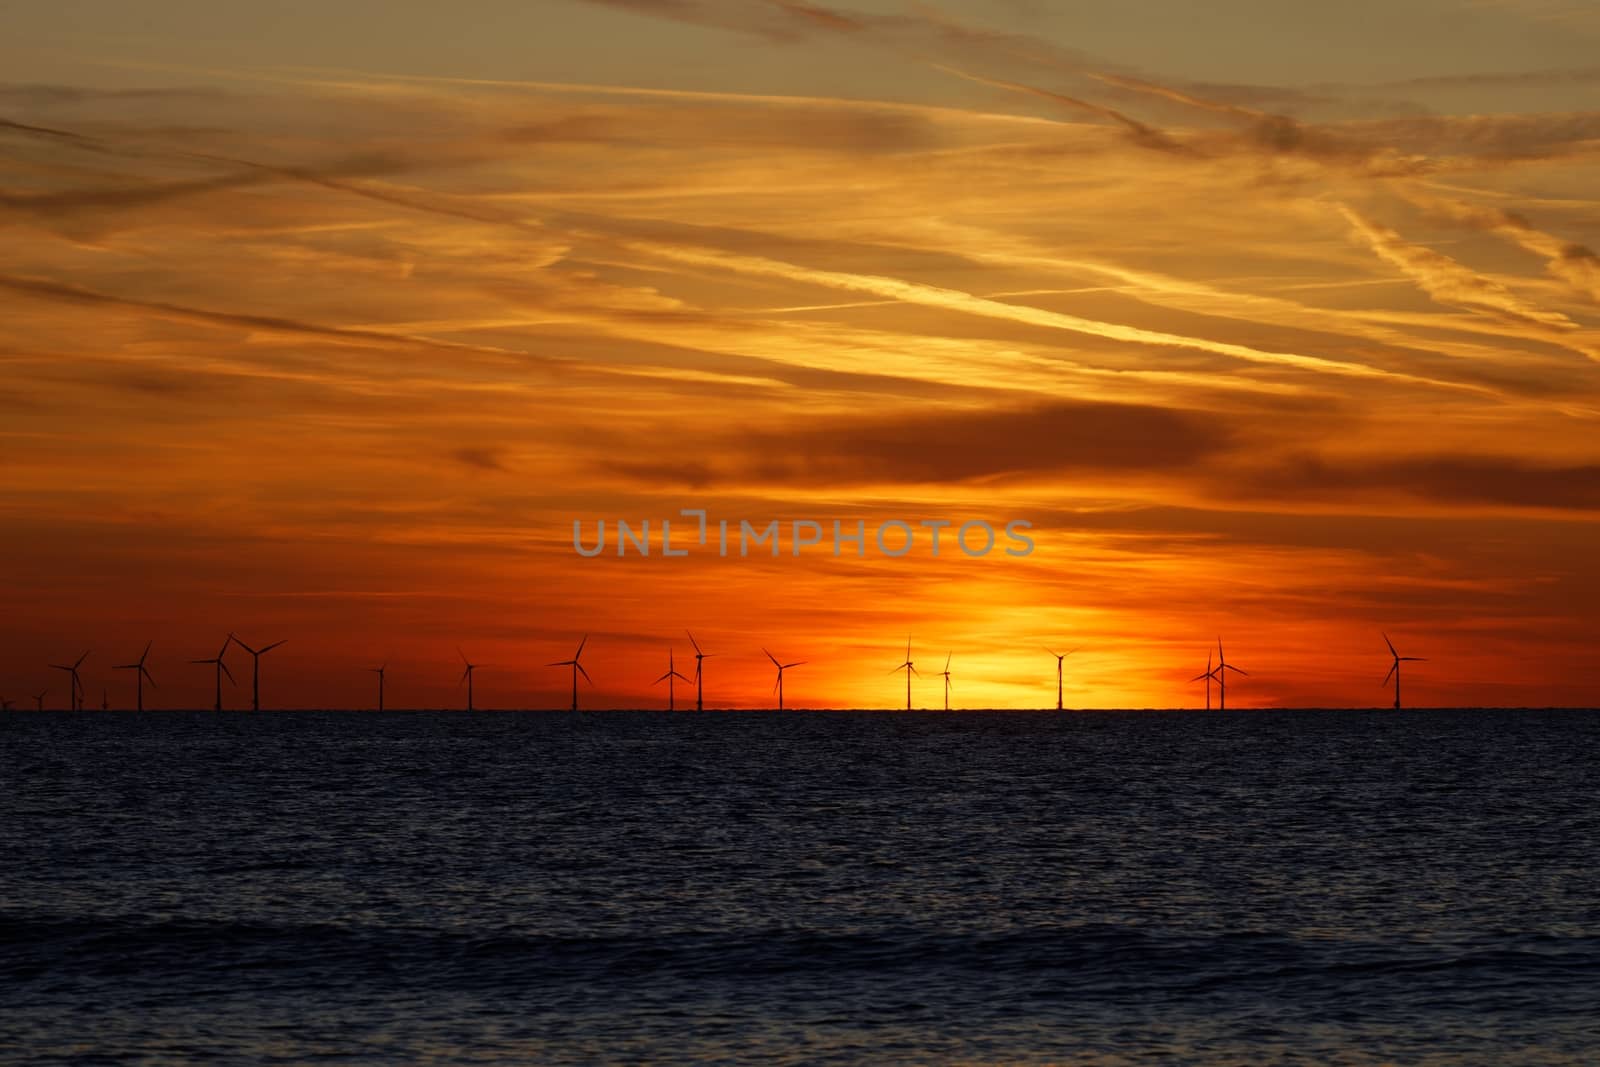 Windfarm on the sea at sunset by svedoliver